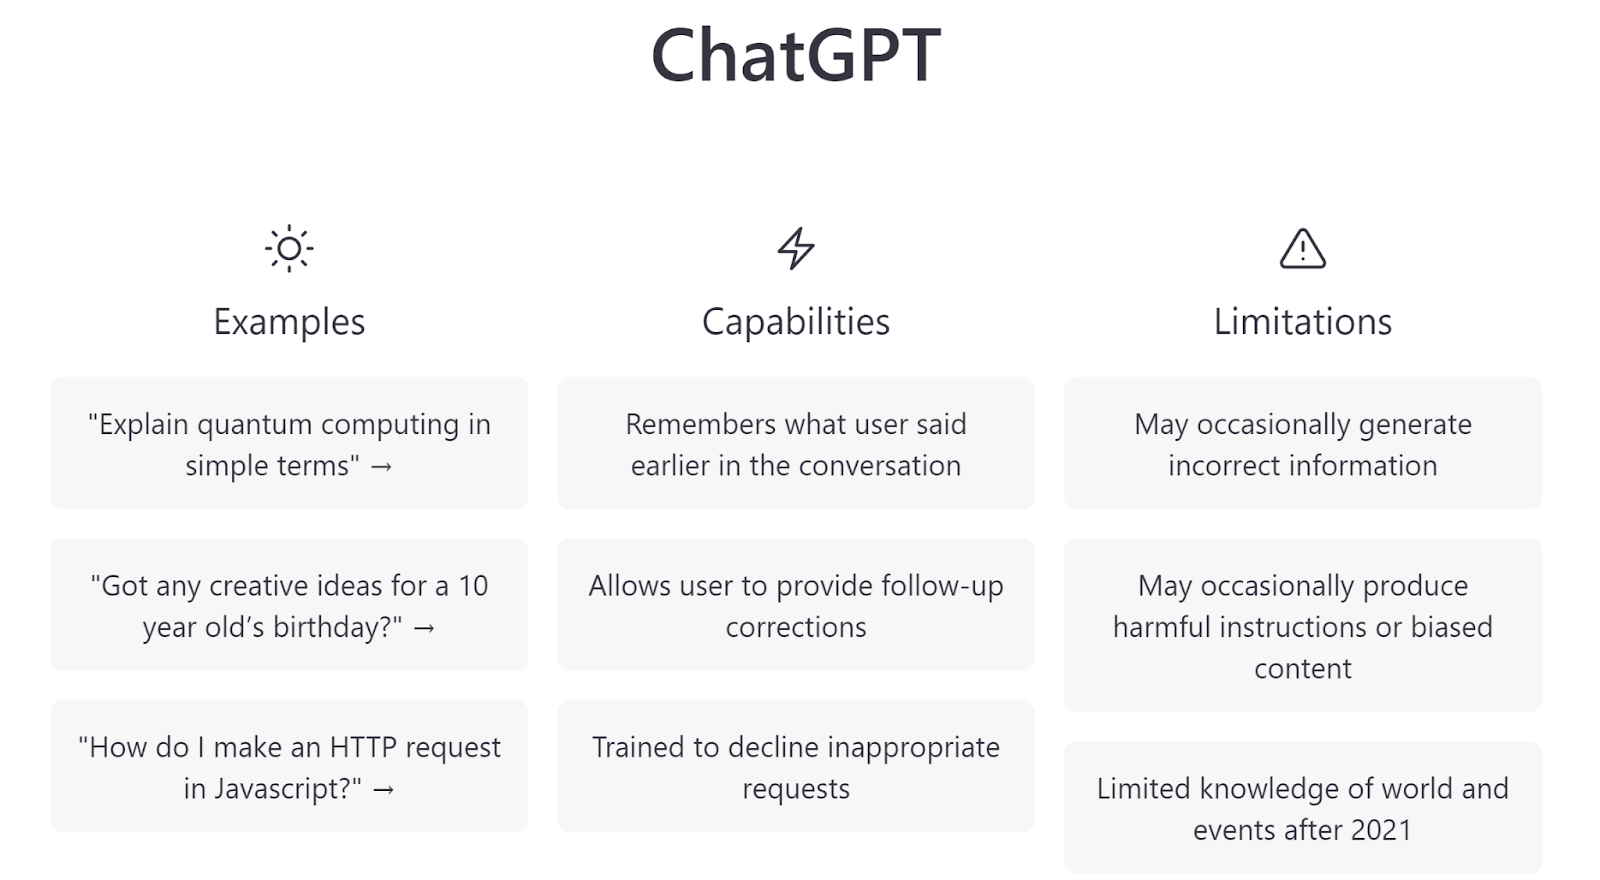 How ChatGPT and Social Media Can Work Together